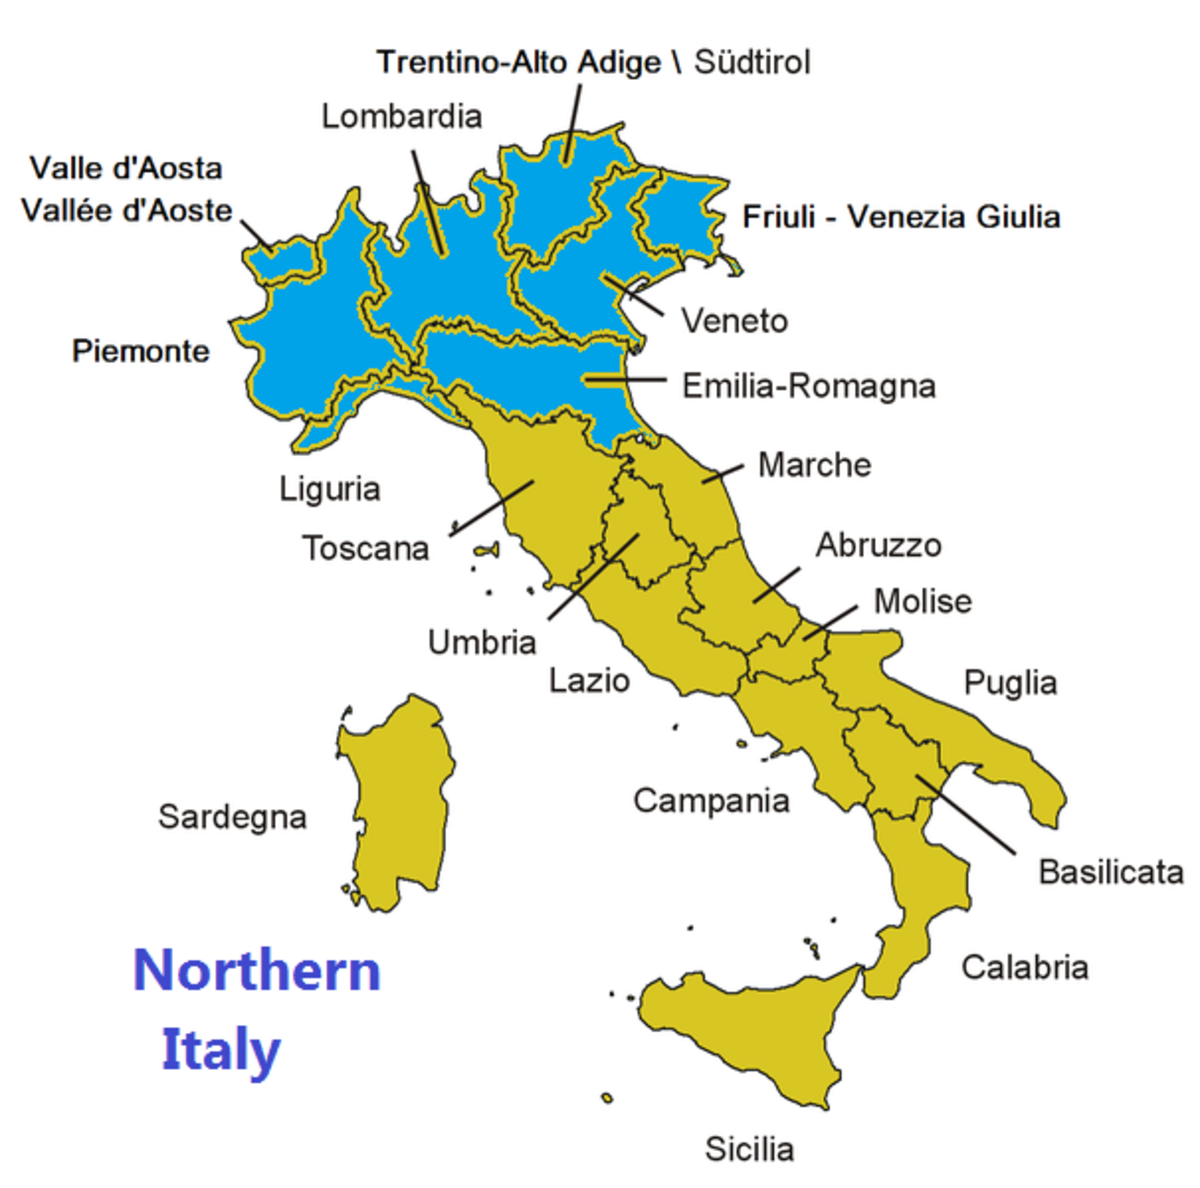 Regions of Italy, Northern Italy in blue.